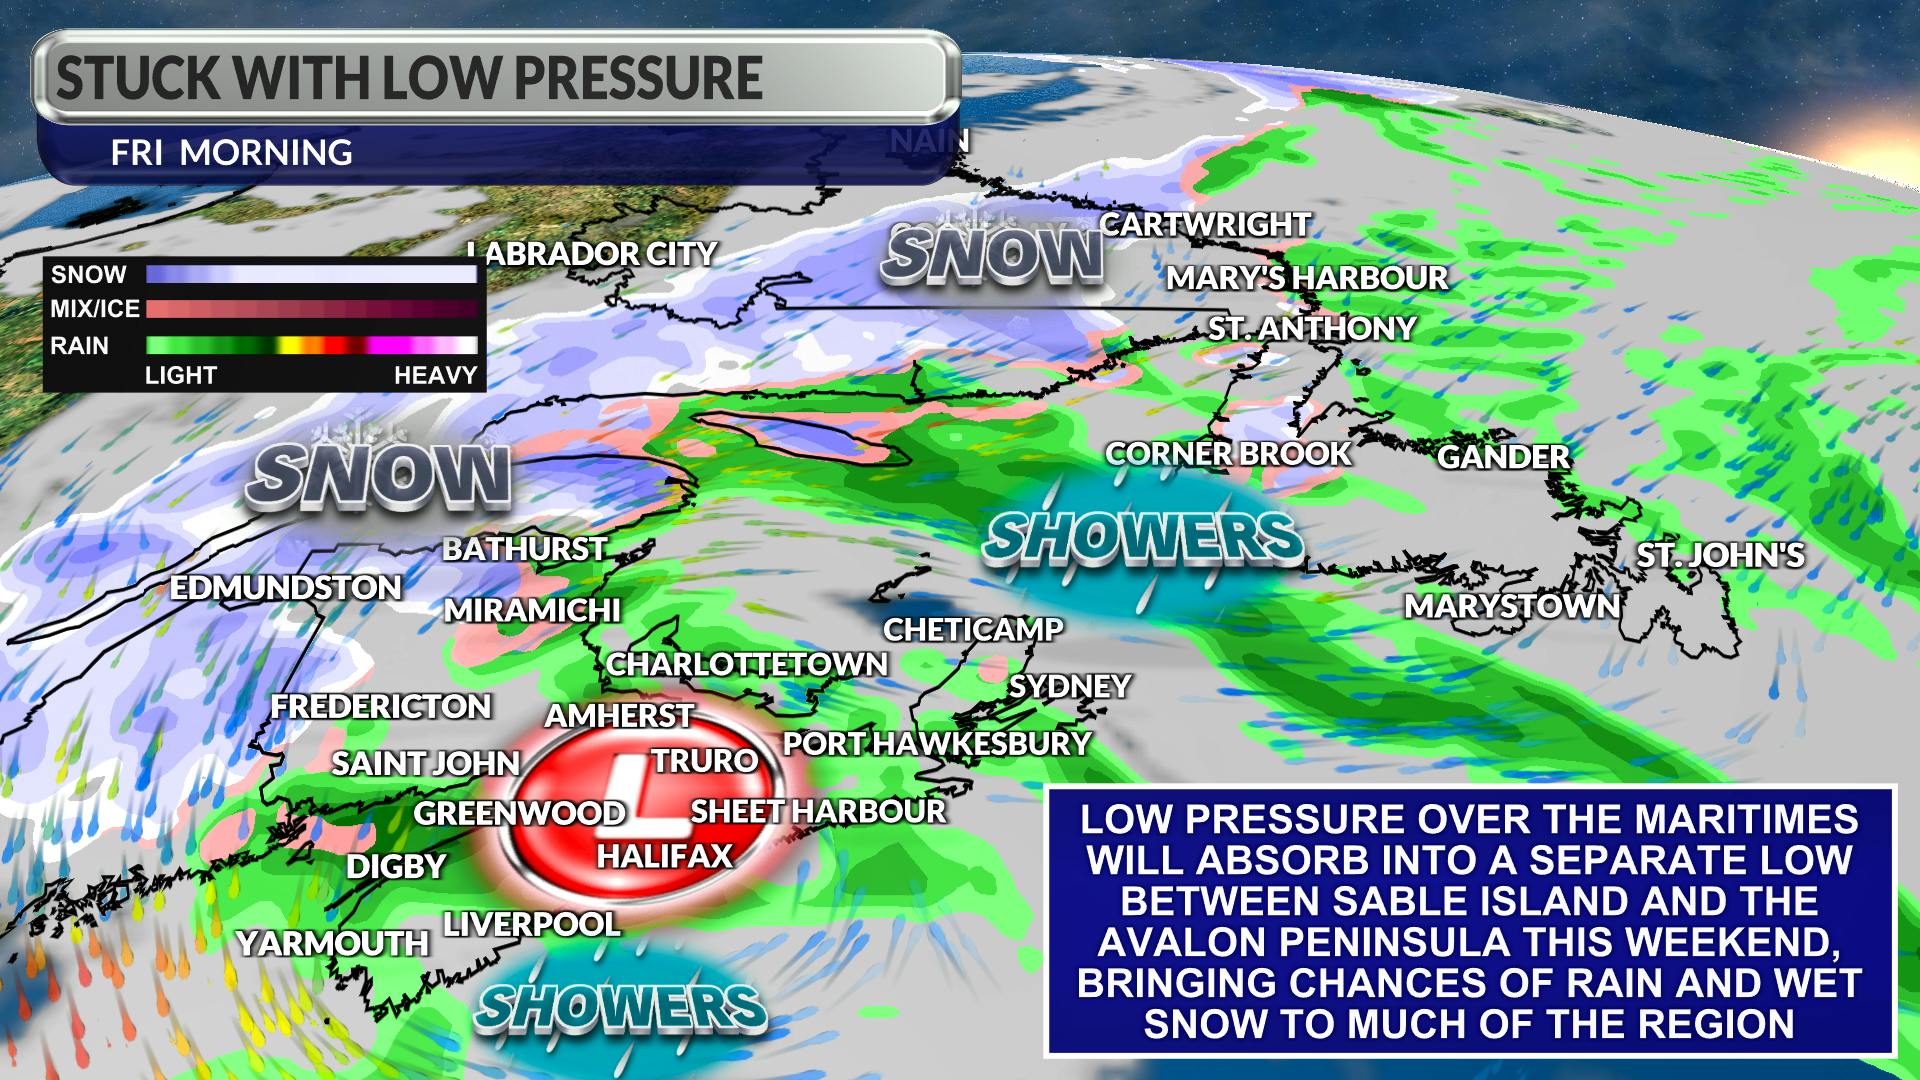 Stalled low-pressure will bring plenty of clouds and chances of precipitation through the upcoming weekend.